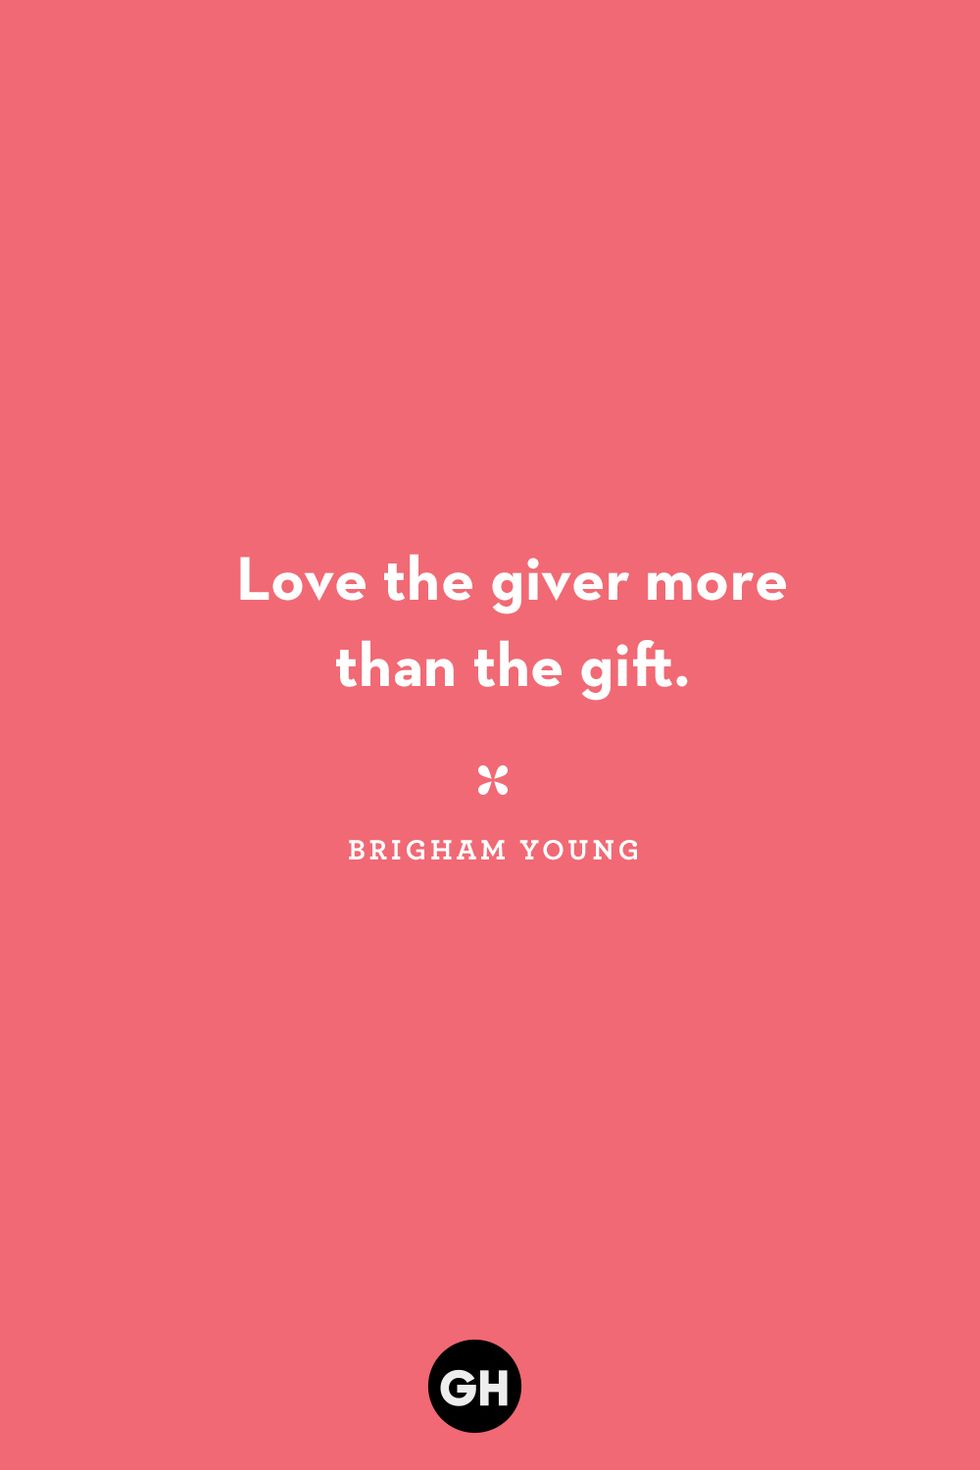 https://hips.hearstapps.com/hmg-prod/images/giving-quotes-brigham-young-1598538660.jpg?crop=1xw:1xh;center,top&resize=980:*